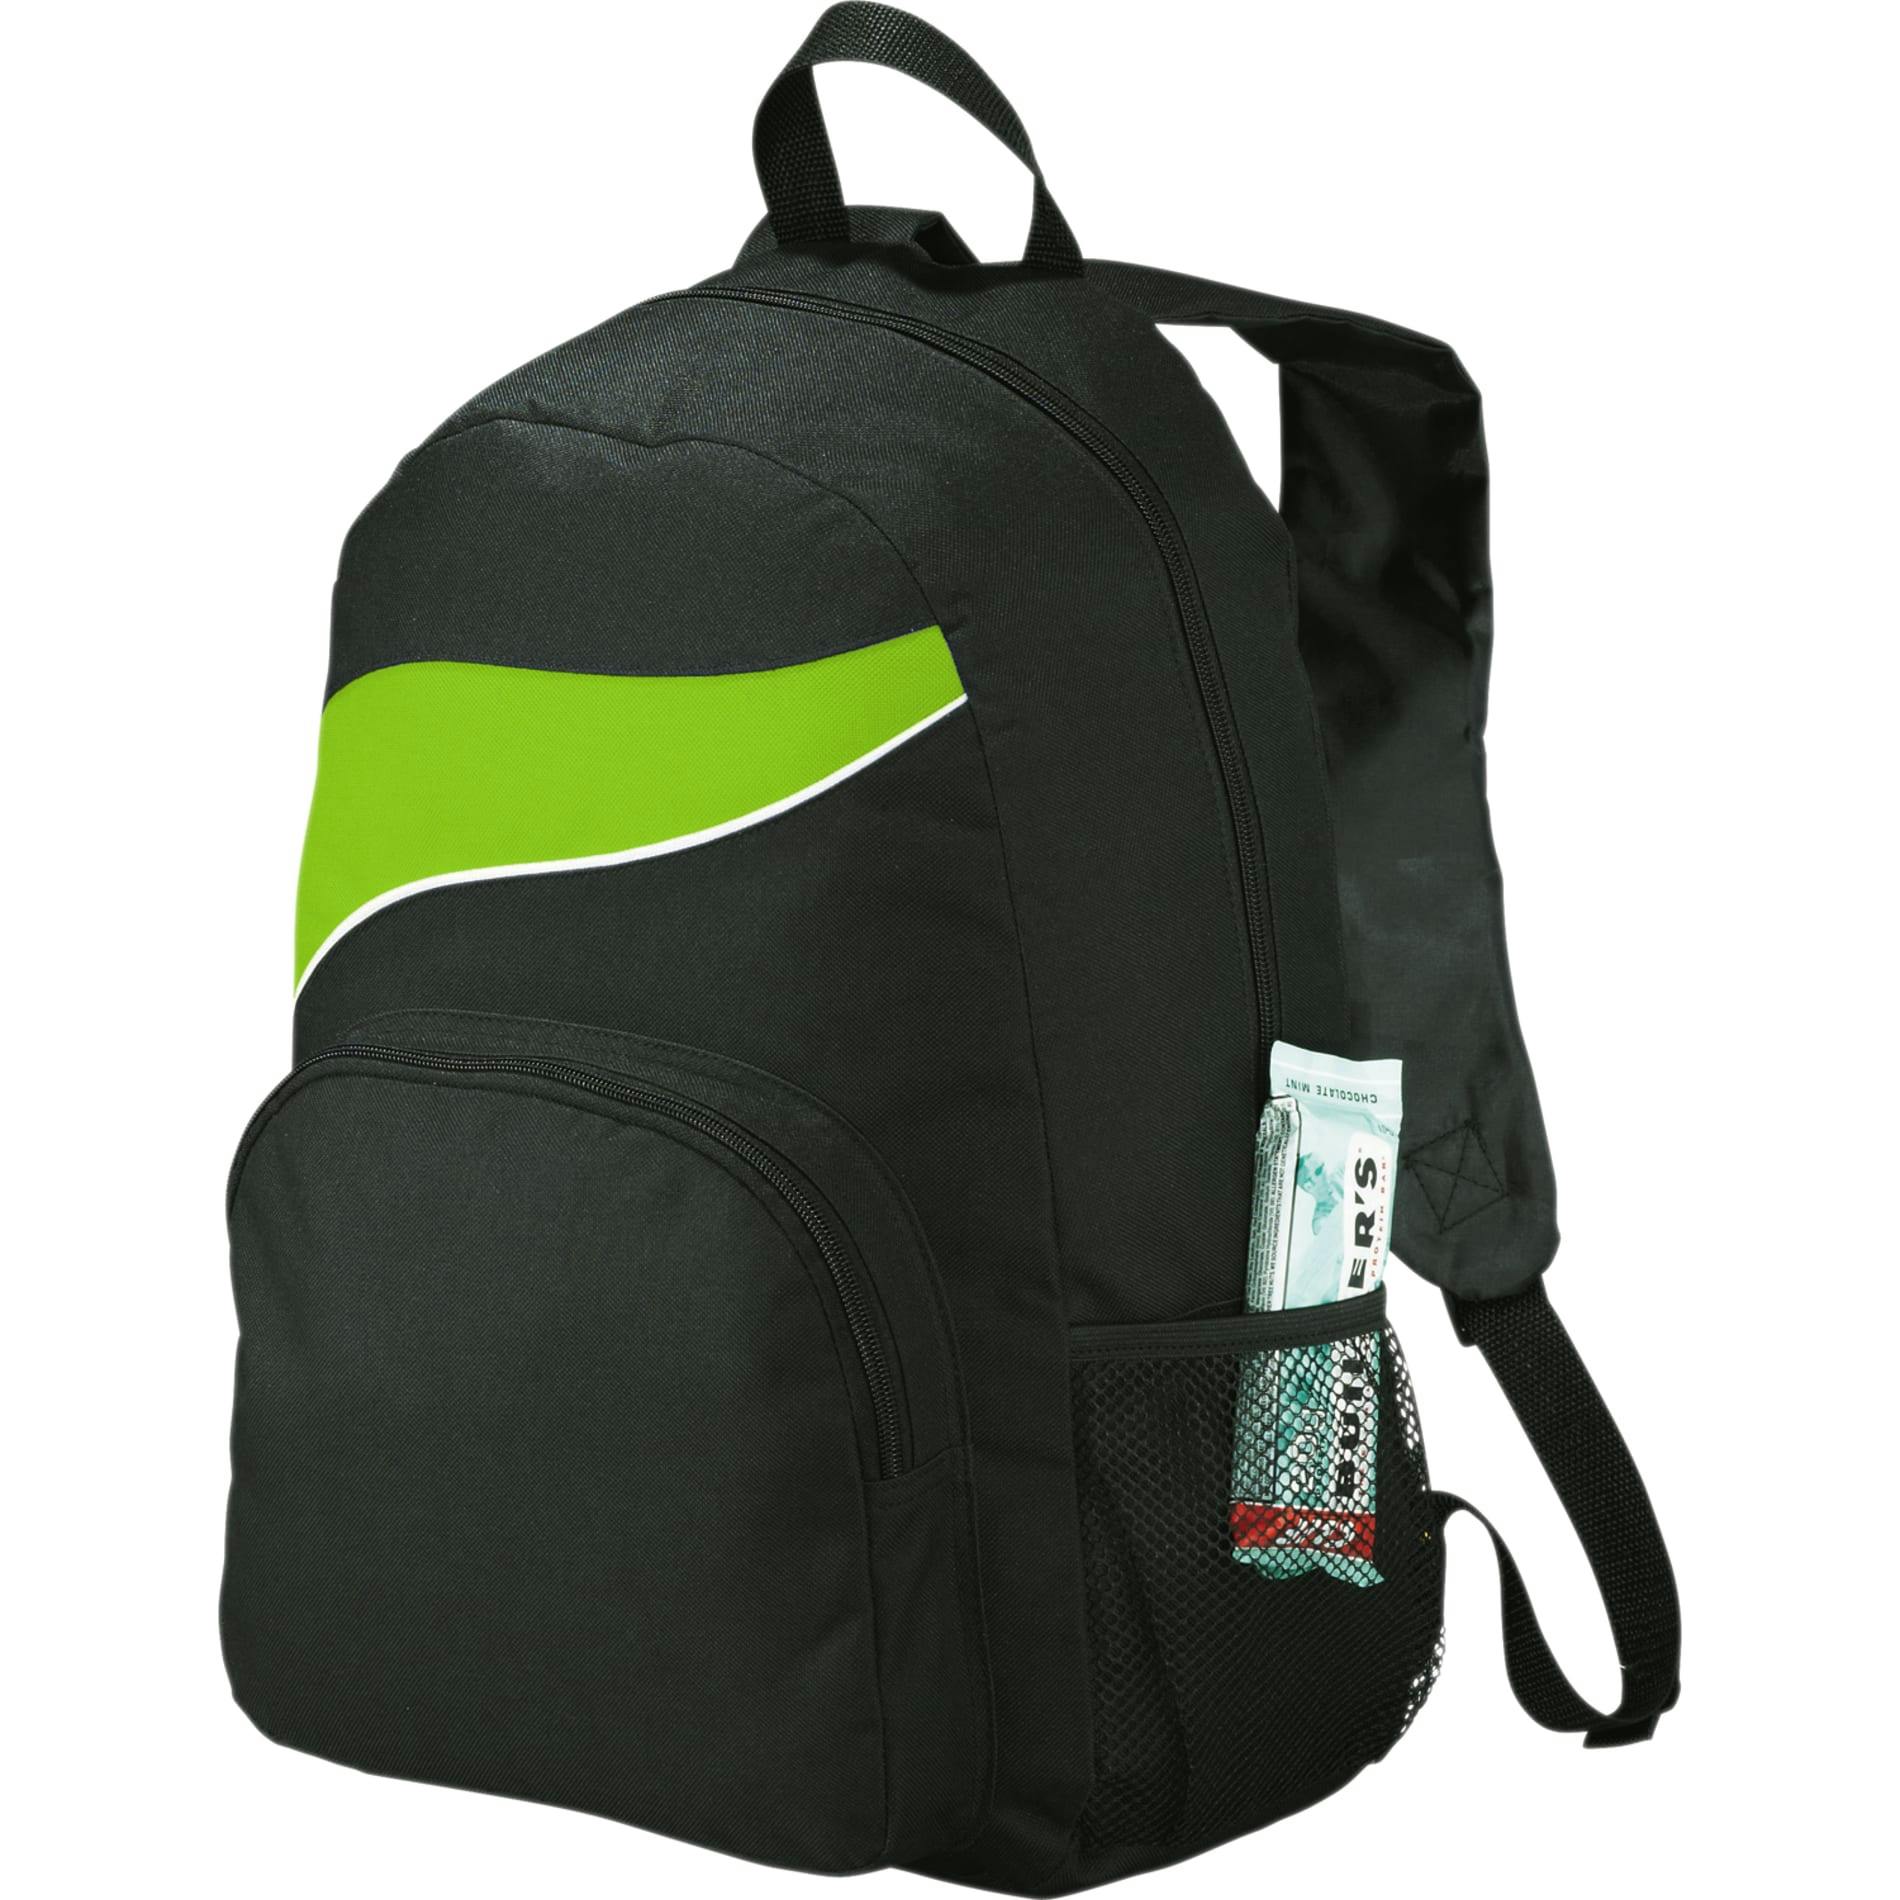 Tornado Deluxe Backpack - additional Image 1